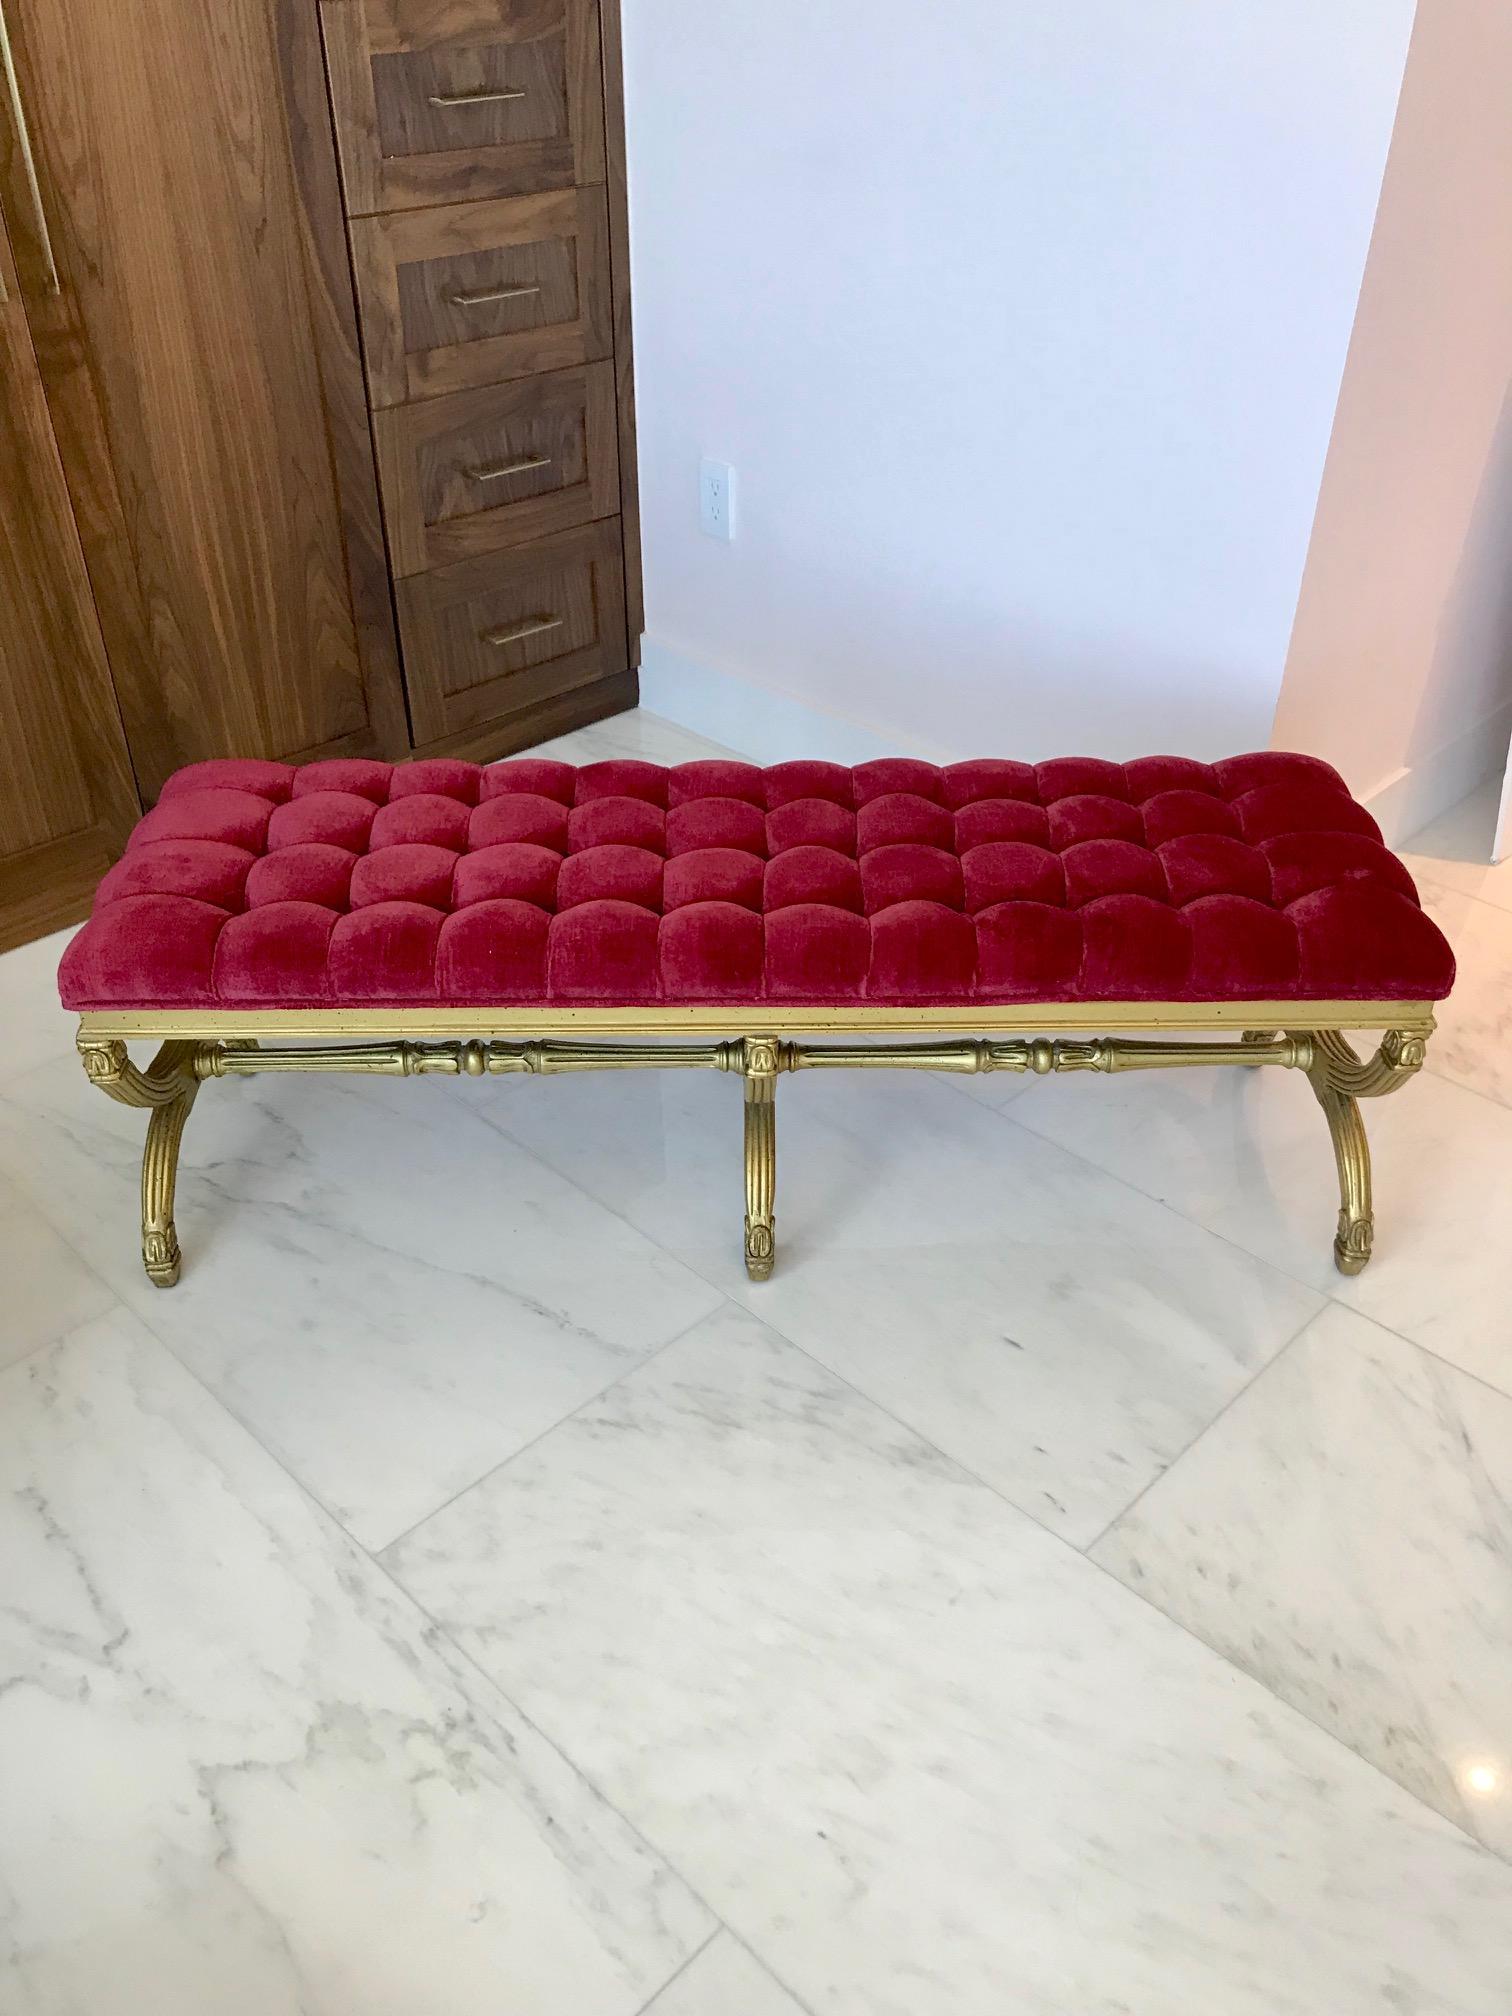 Elegant Venetian Louis XVI style long bench with giltwood frame. Features beautiful biscuit tufted seat in a deep red fabric. Base features series of ornate hand carved designs with antiqued gold leaf finish.